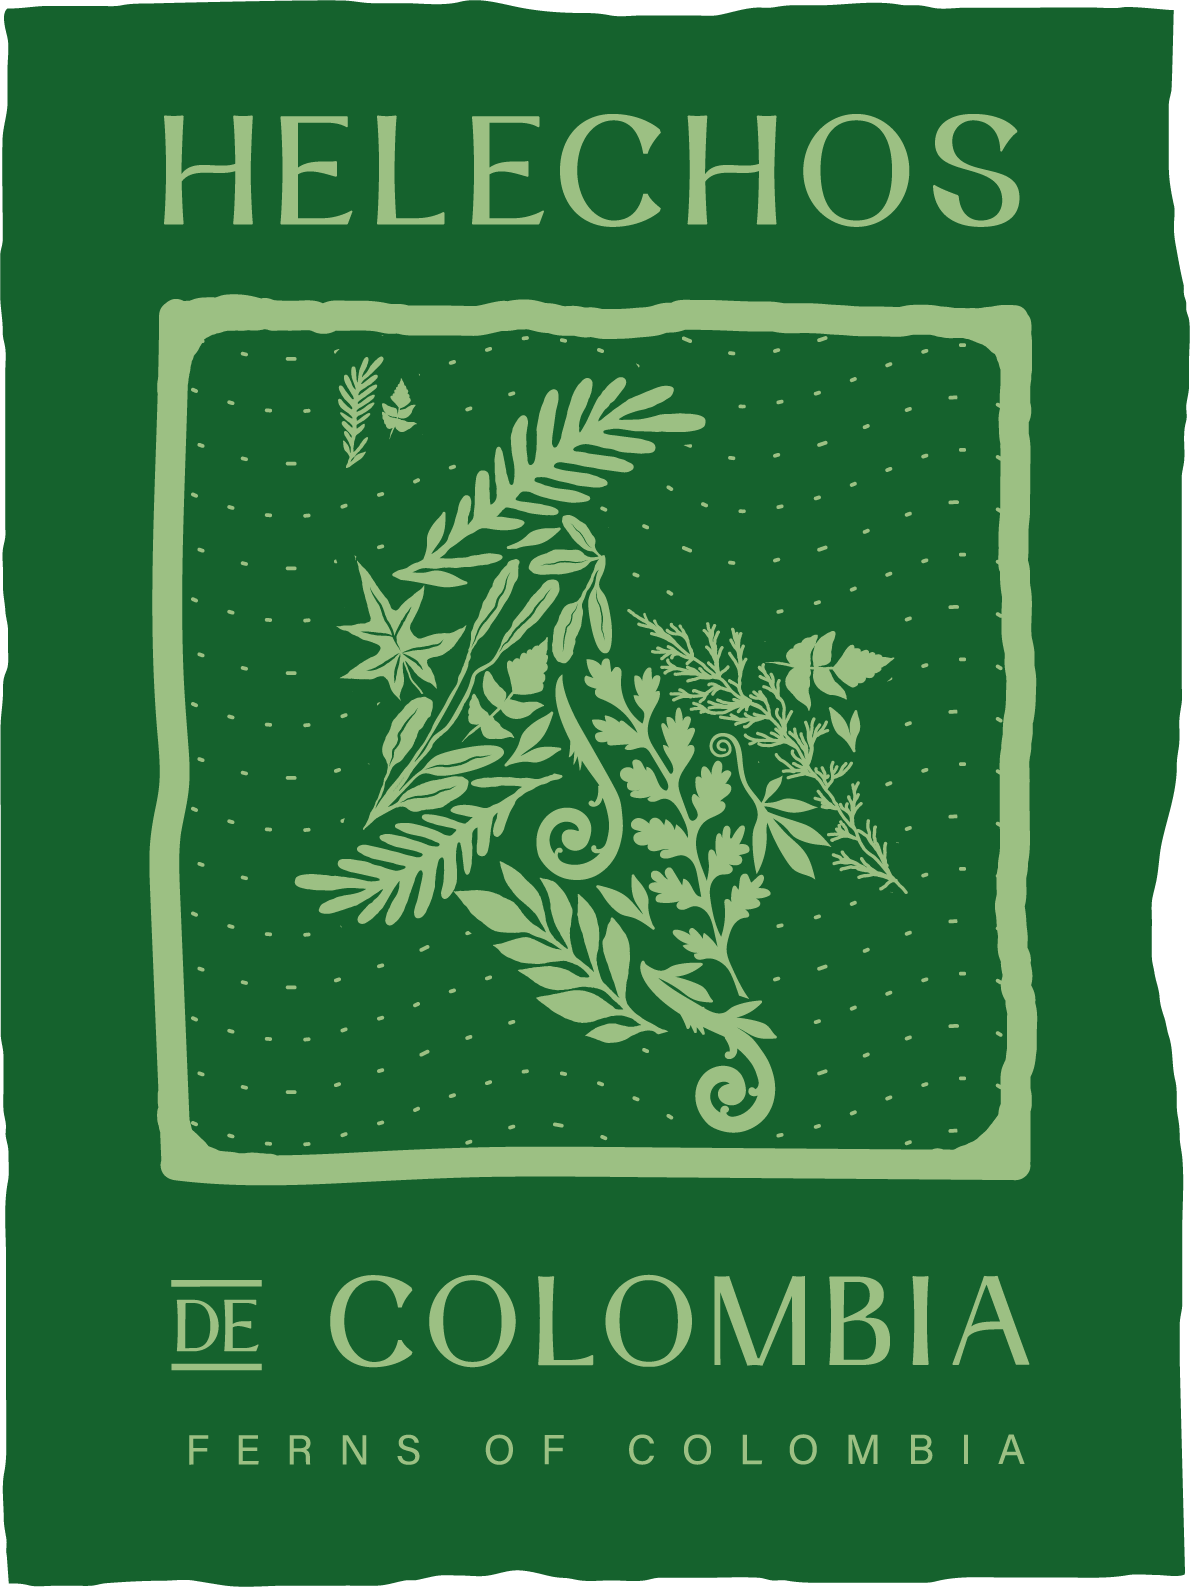 Ferns of Colombia